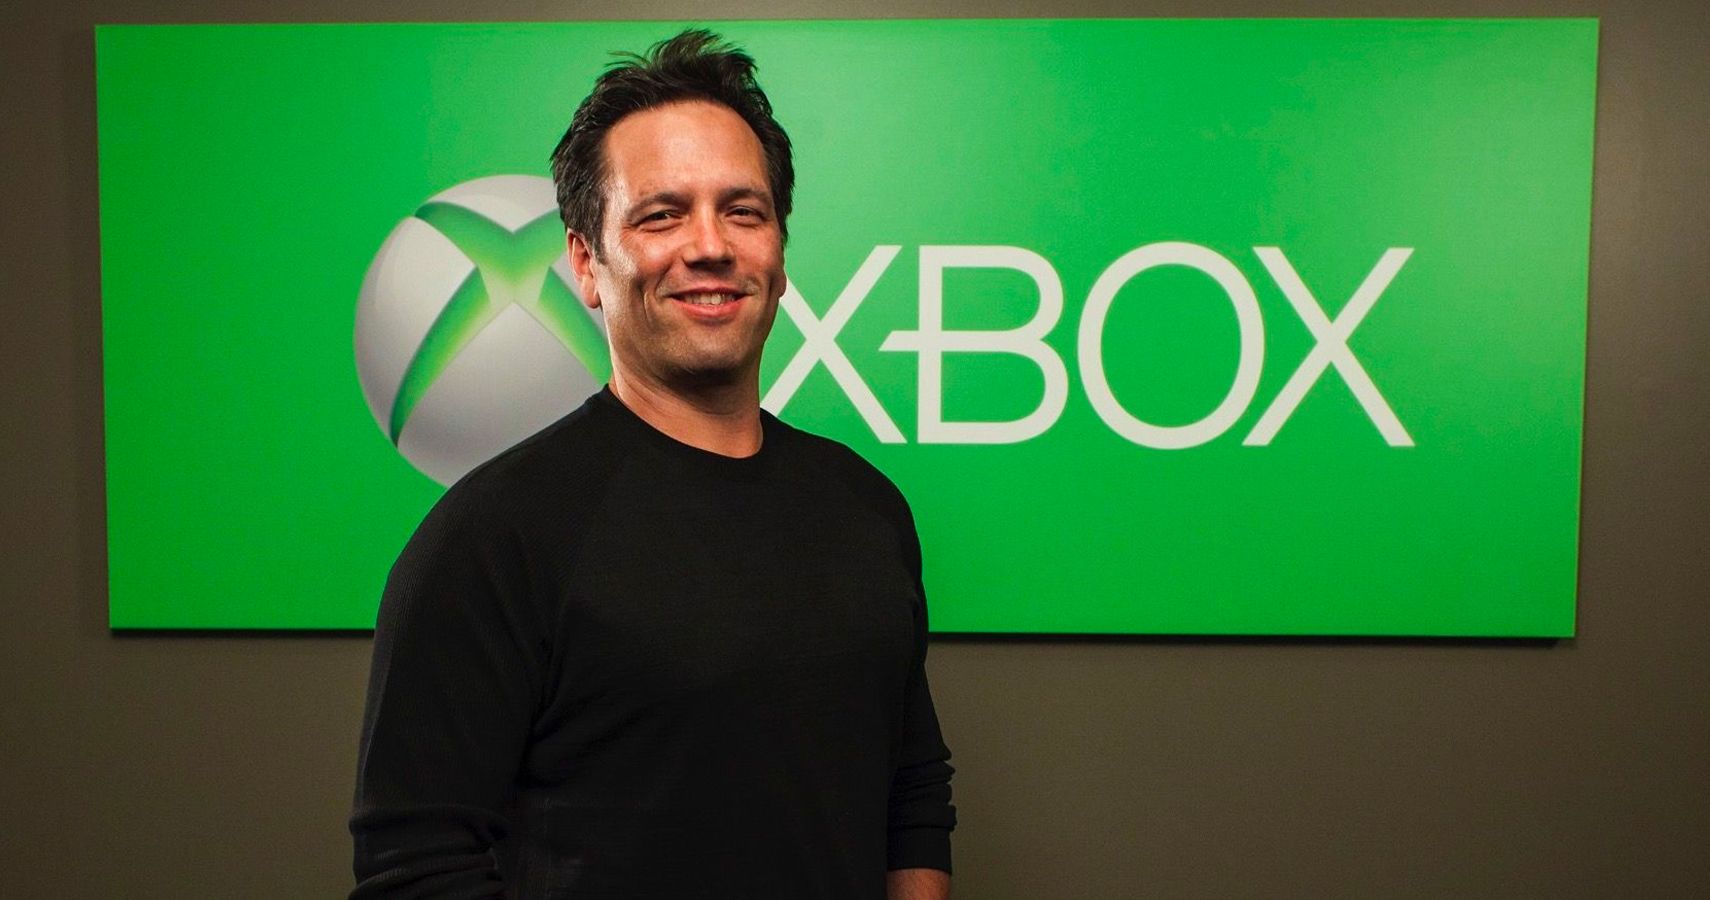 Phil Spencer reveals some incredible Xbox and gaming industry